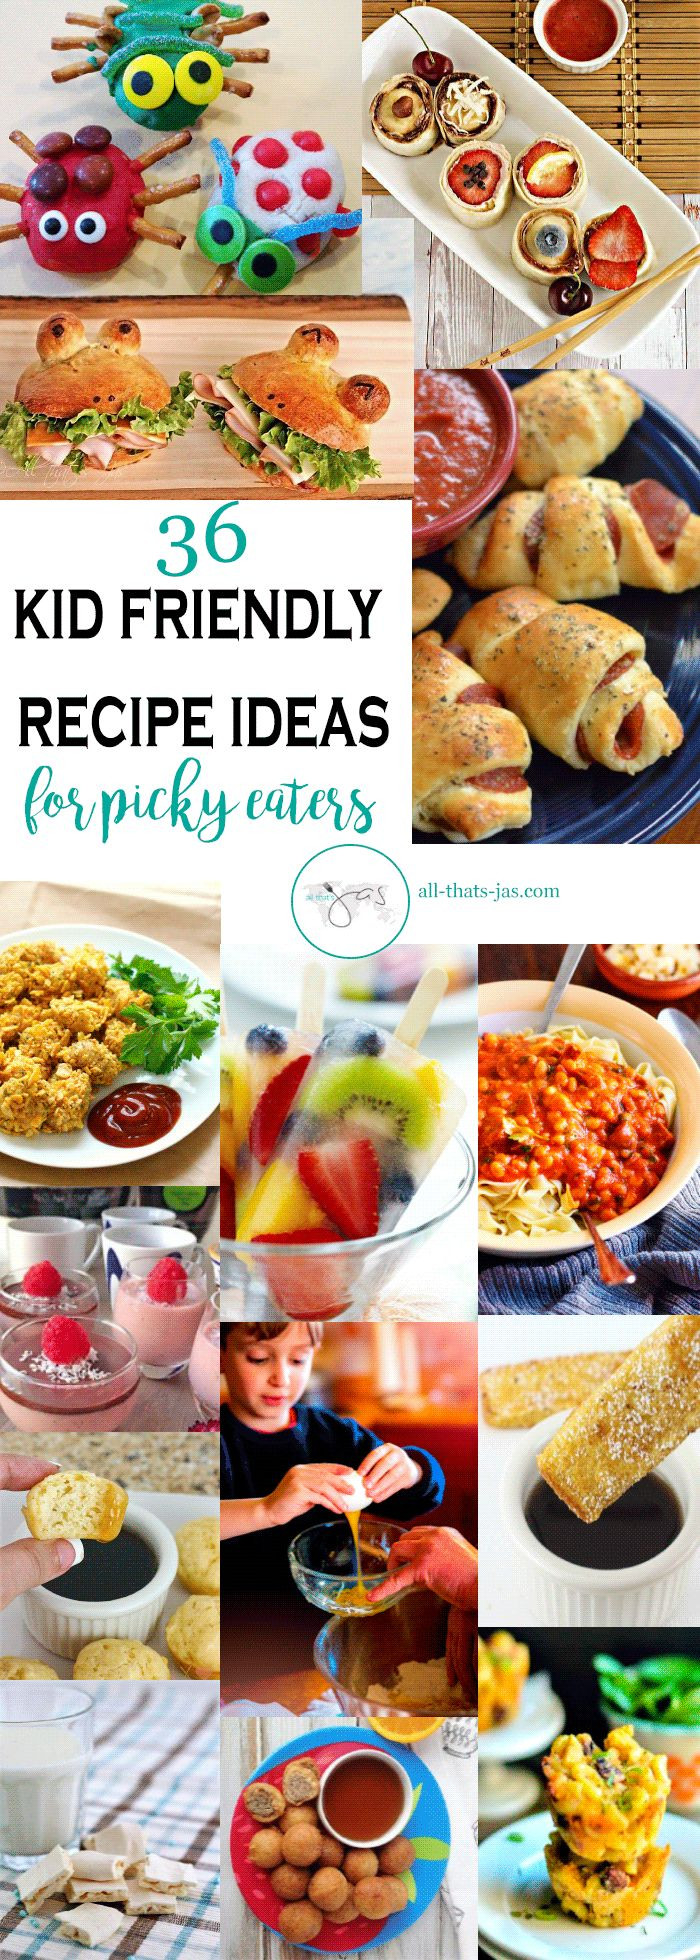 Kid Friendly Dinners for Picky Eaters Unique 36 Kid Friendly Recipe Ideas for Picky Eaters Roundup In